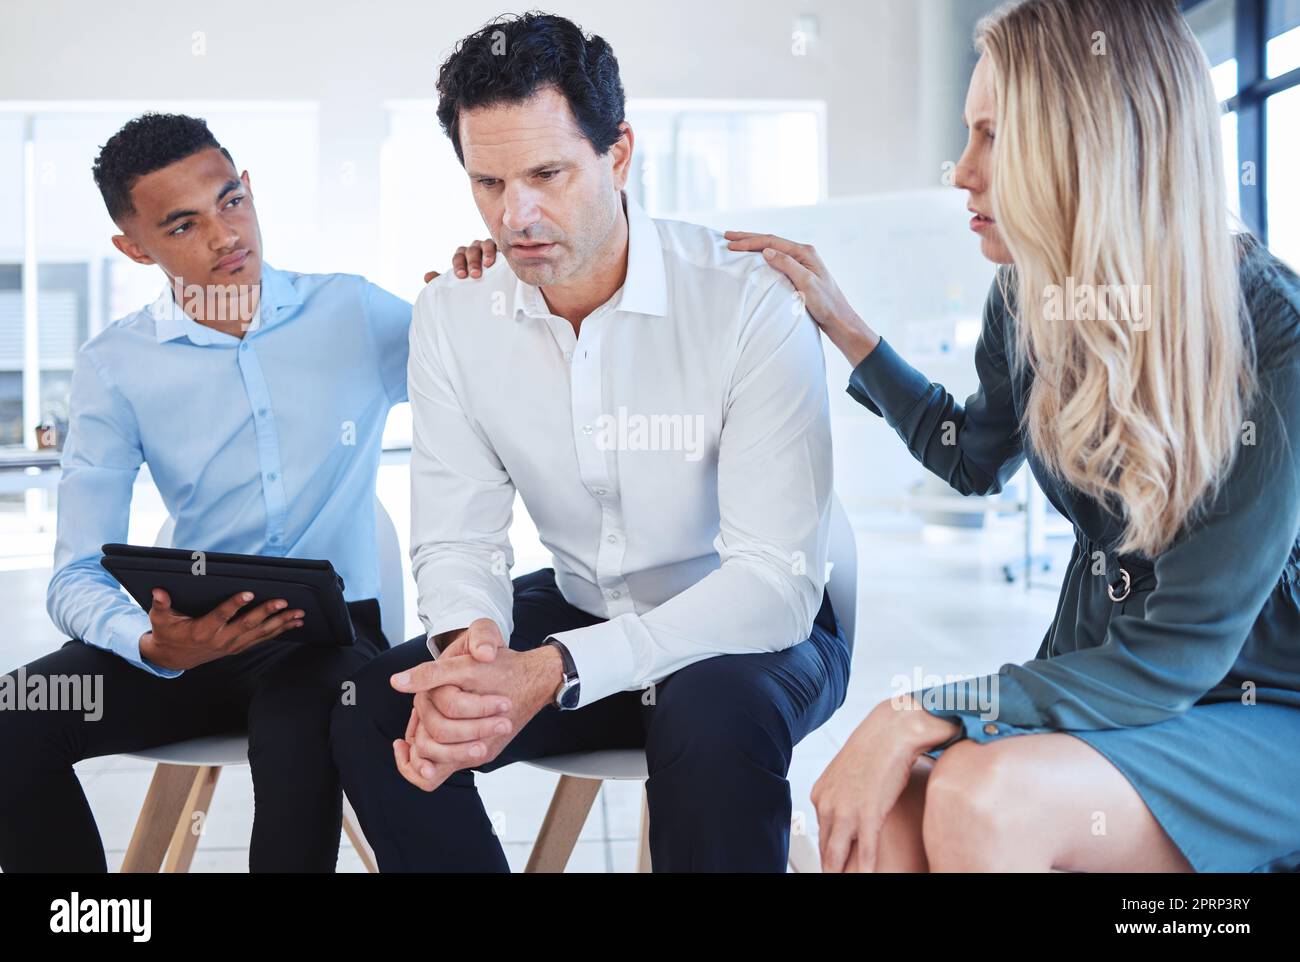 Business, support group and man at the office in depression with supportive colleagues at the workplace. Male employee with mental health problems in divorce, grief or loss with helpful coworkers. Stock Photo